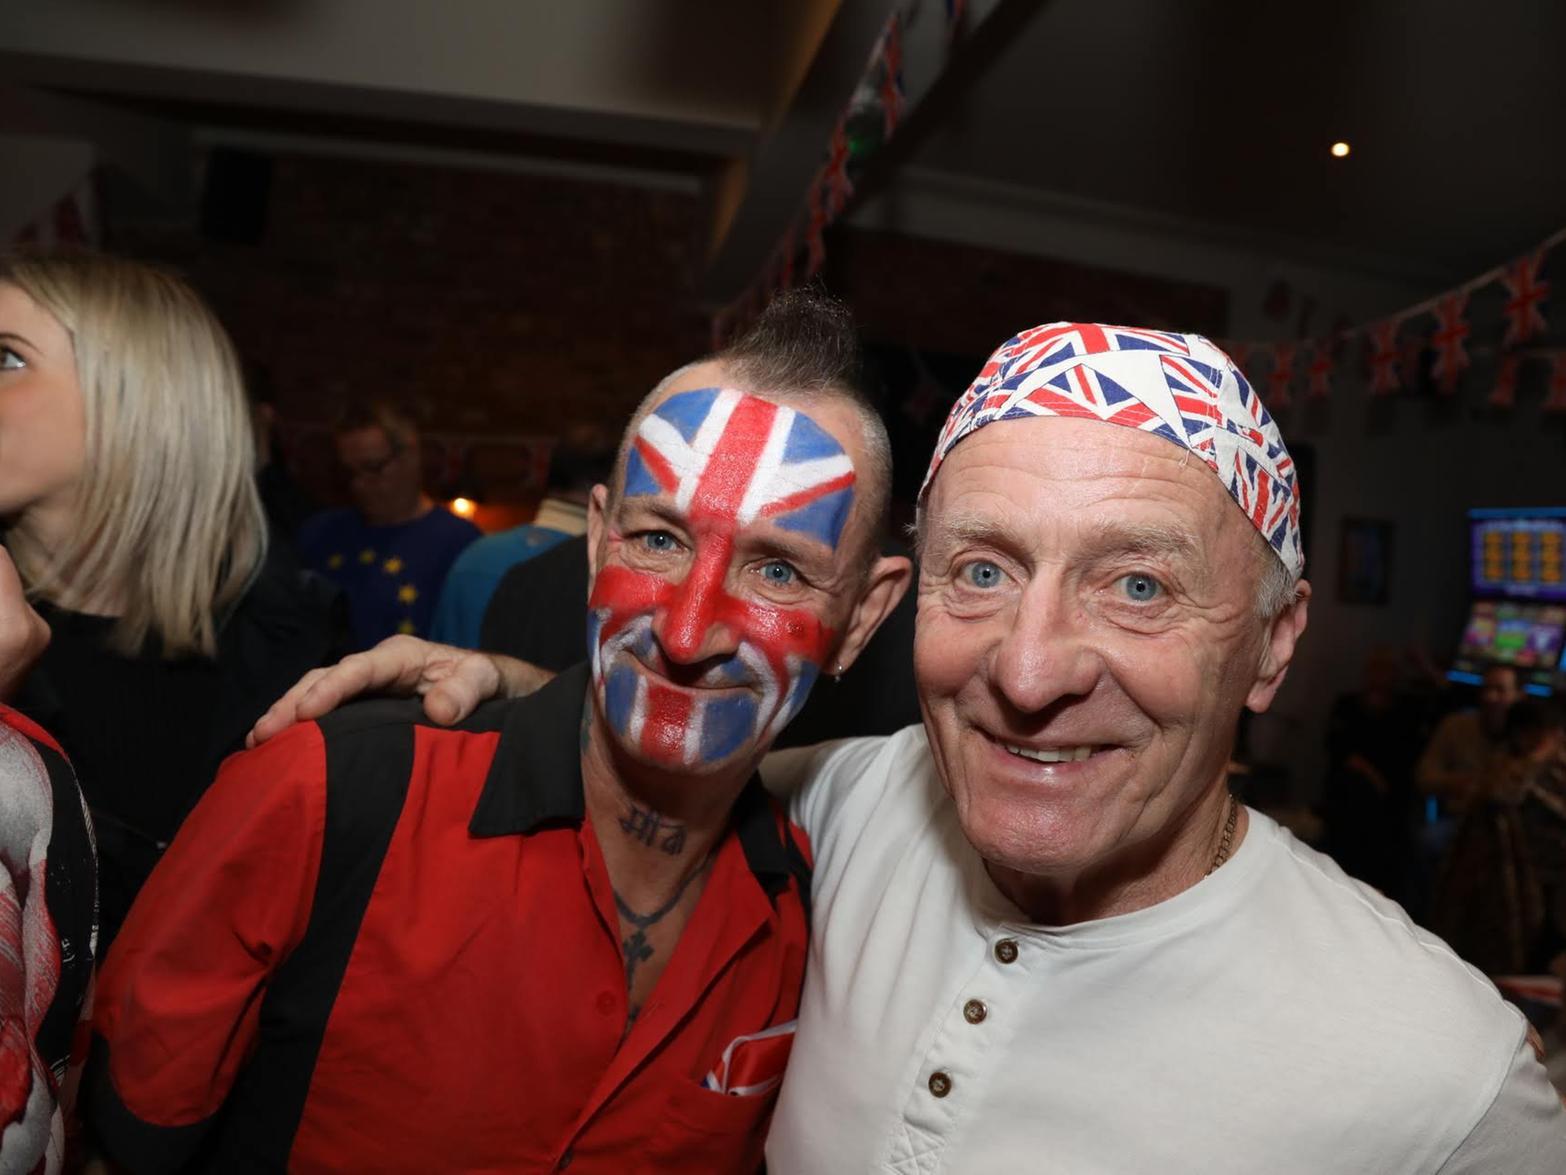 Mick Goodrum (left) with his union flag face paint.